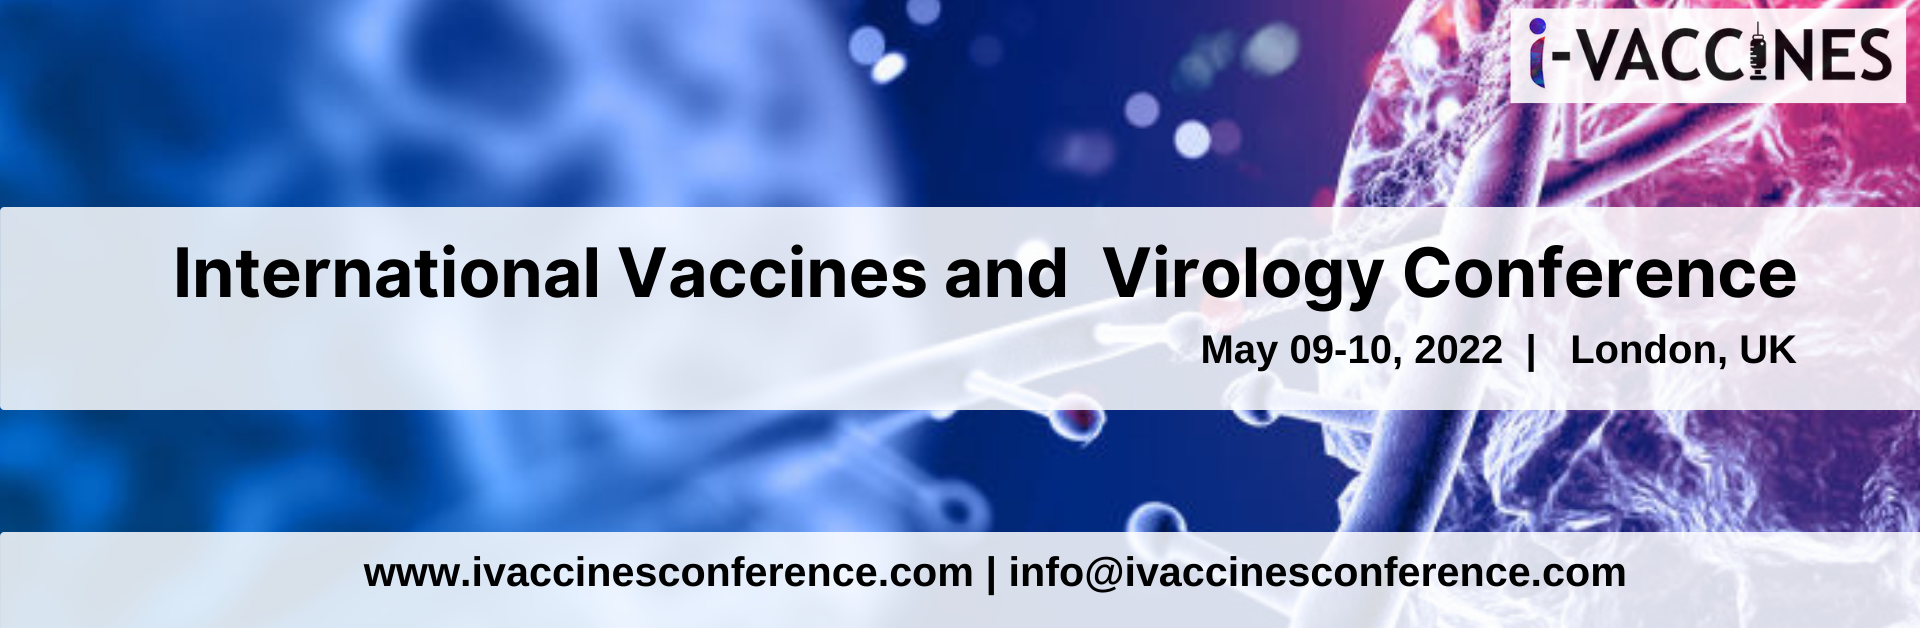 International Vaccines and Virology Conference i-Vaccines